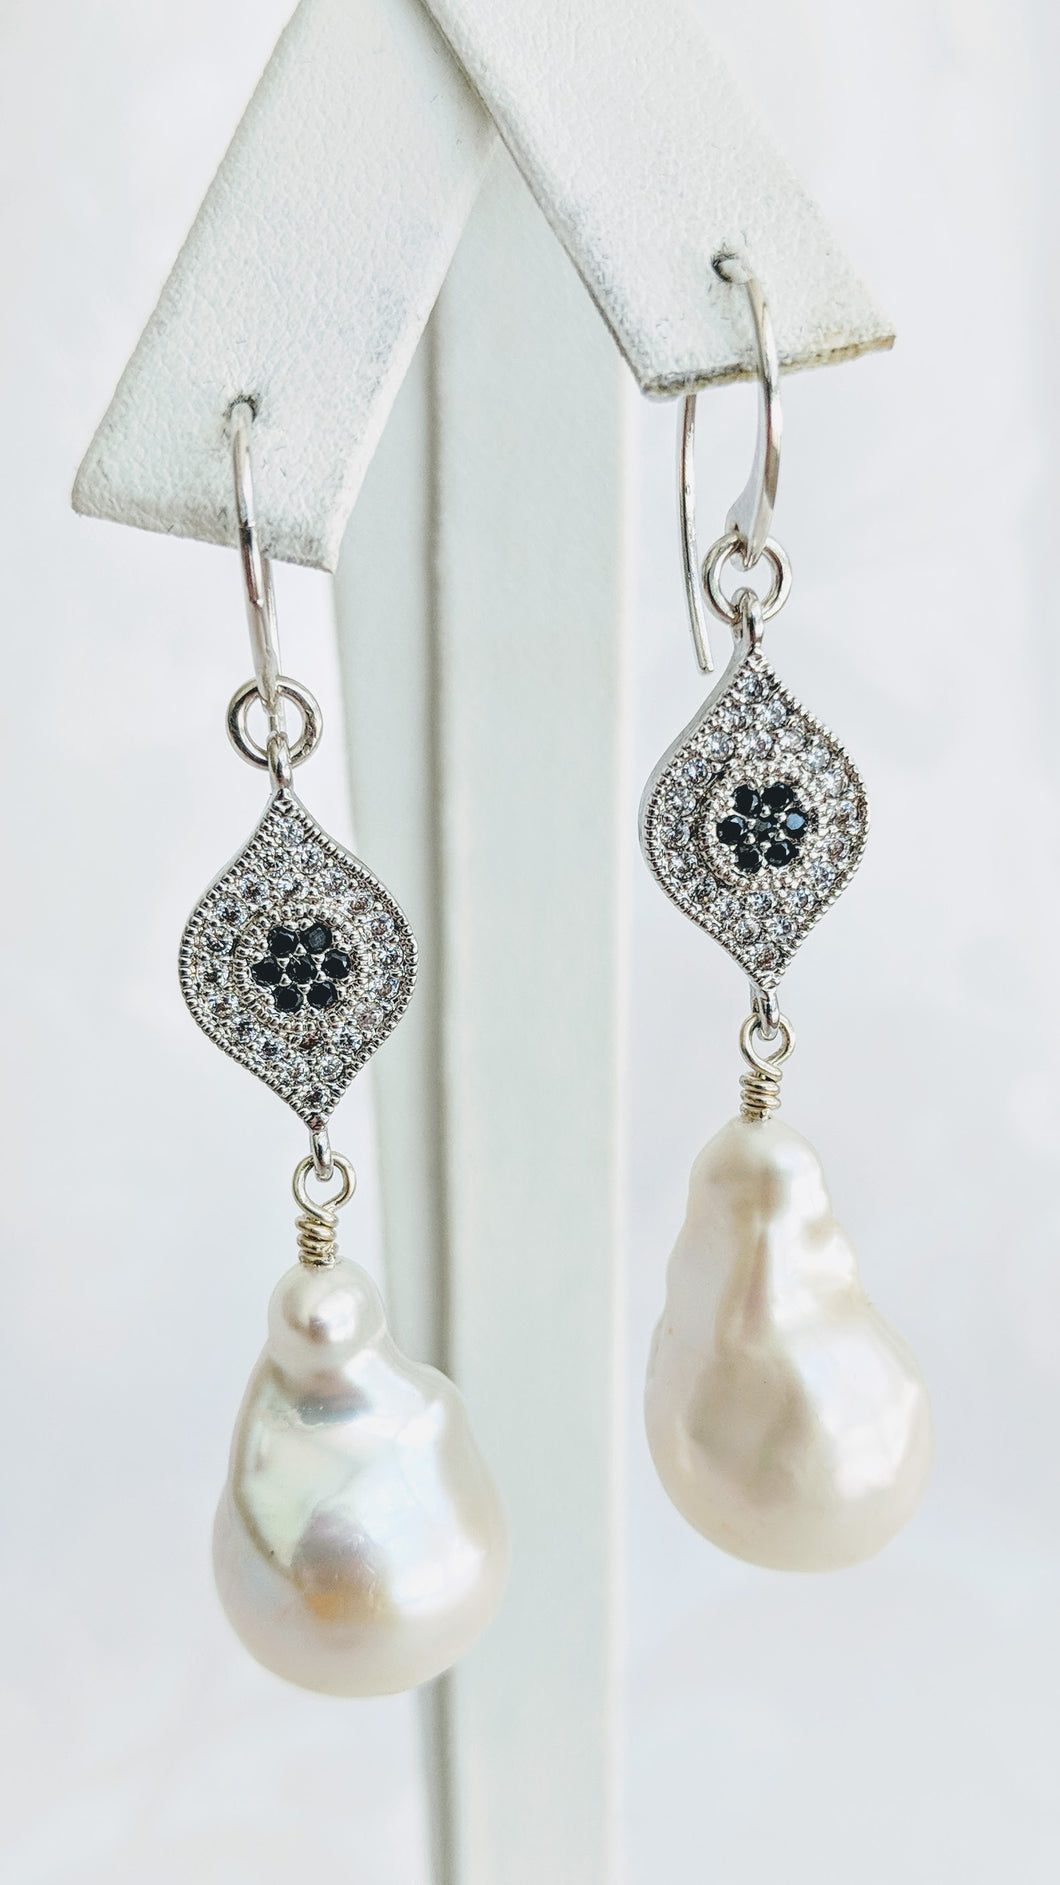 Baroque freshwater pearl earrings with silver/cubic zirconia detail